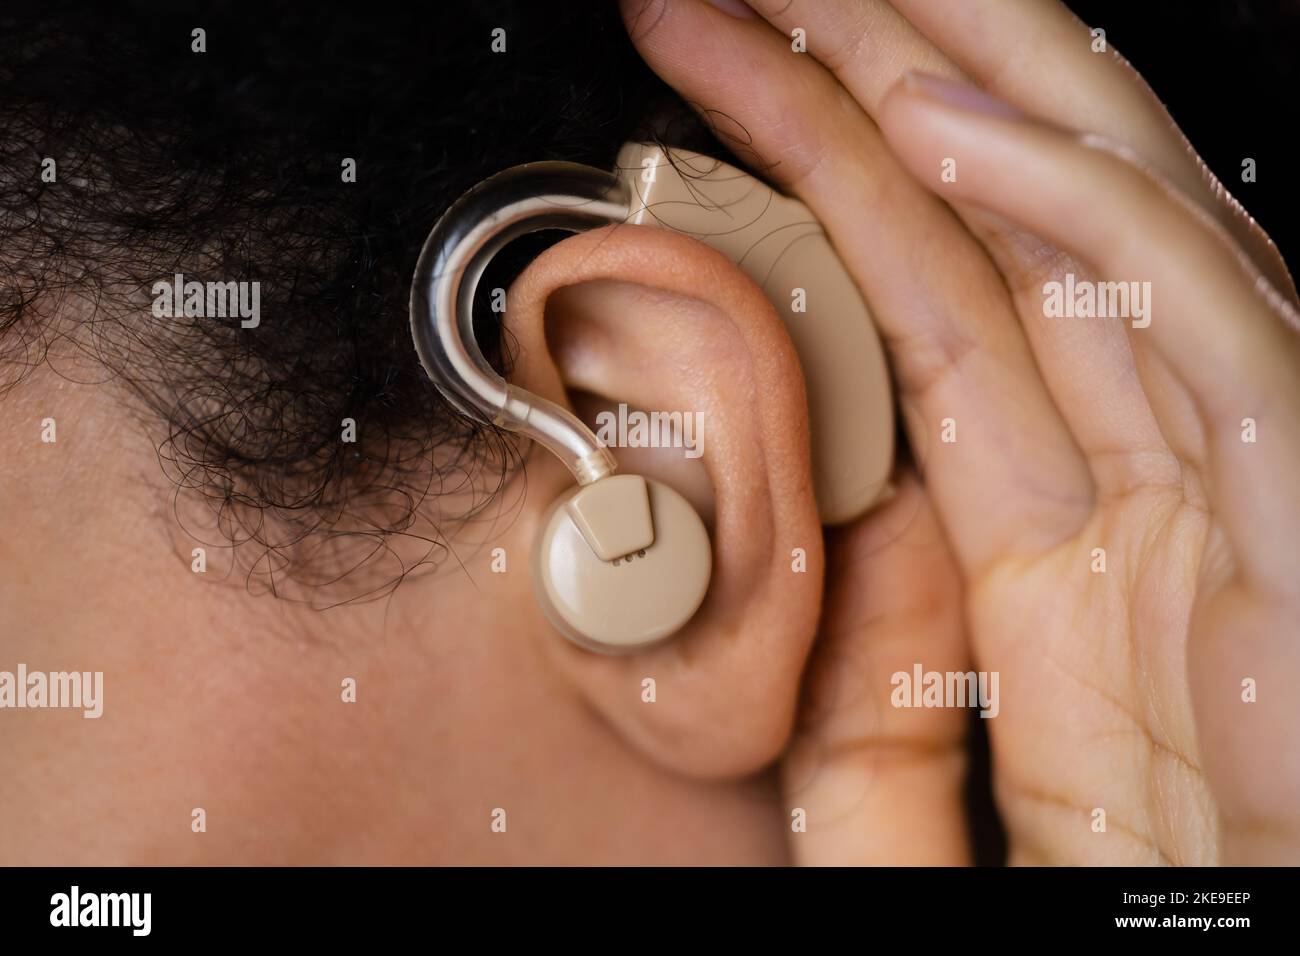 Woman Trying To Hear With Hand Over Ear Stock Photo